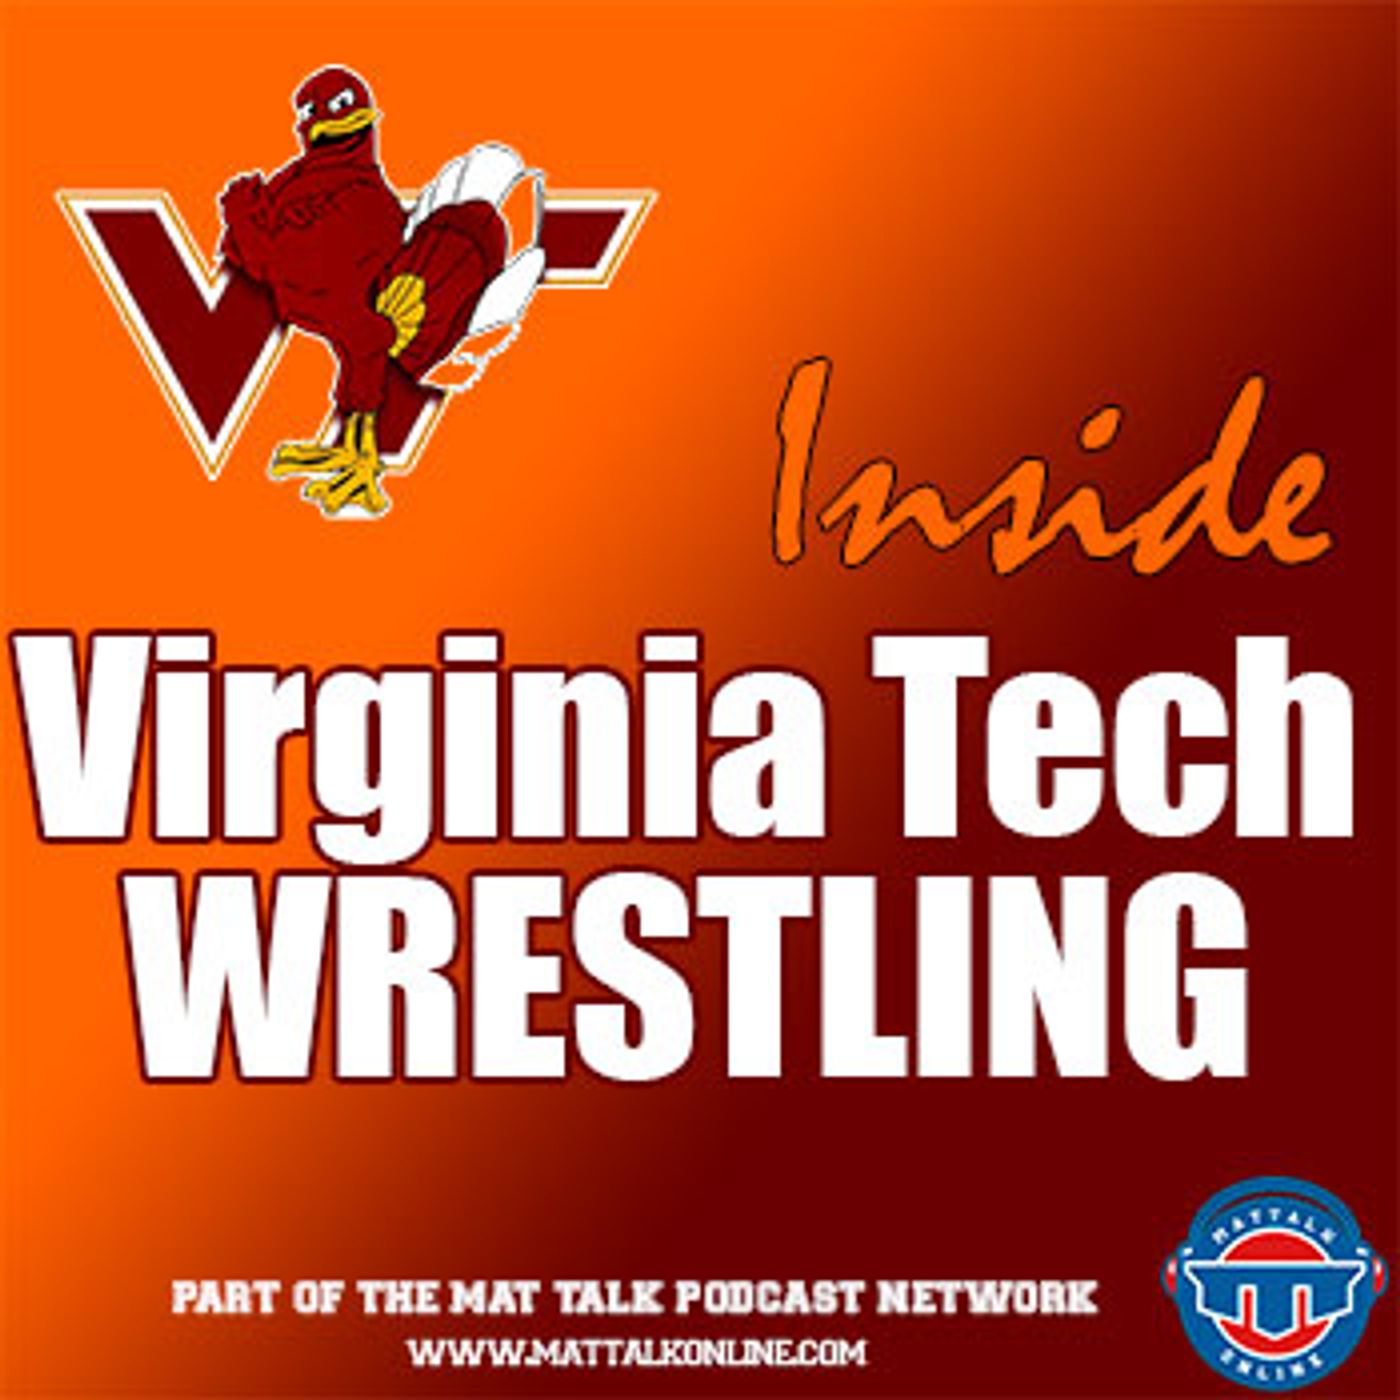 VT30: The dust settles and Coach Dresser recaps the Michigan dual and previews the upcoming ACC championship